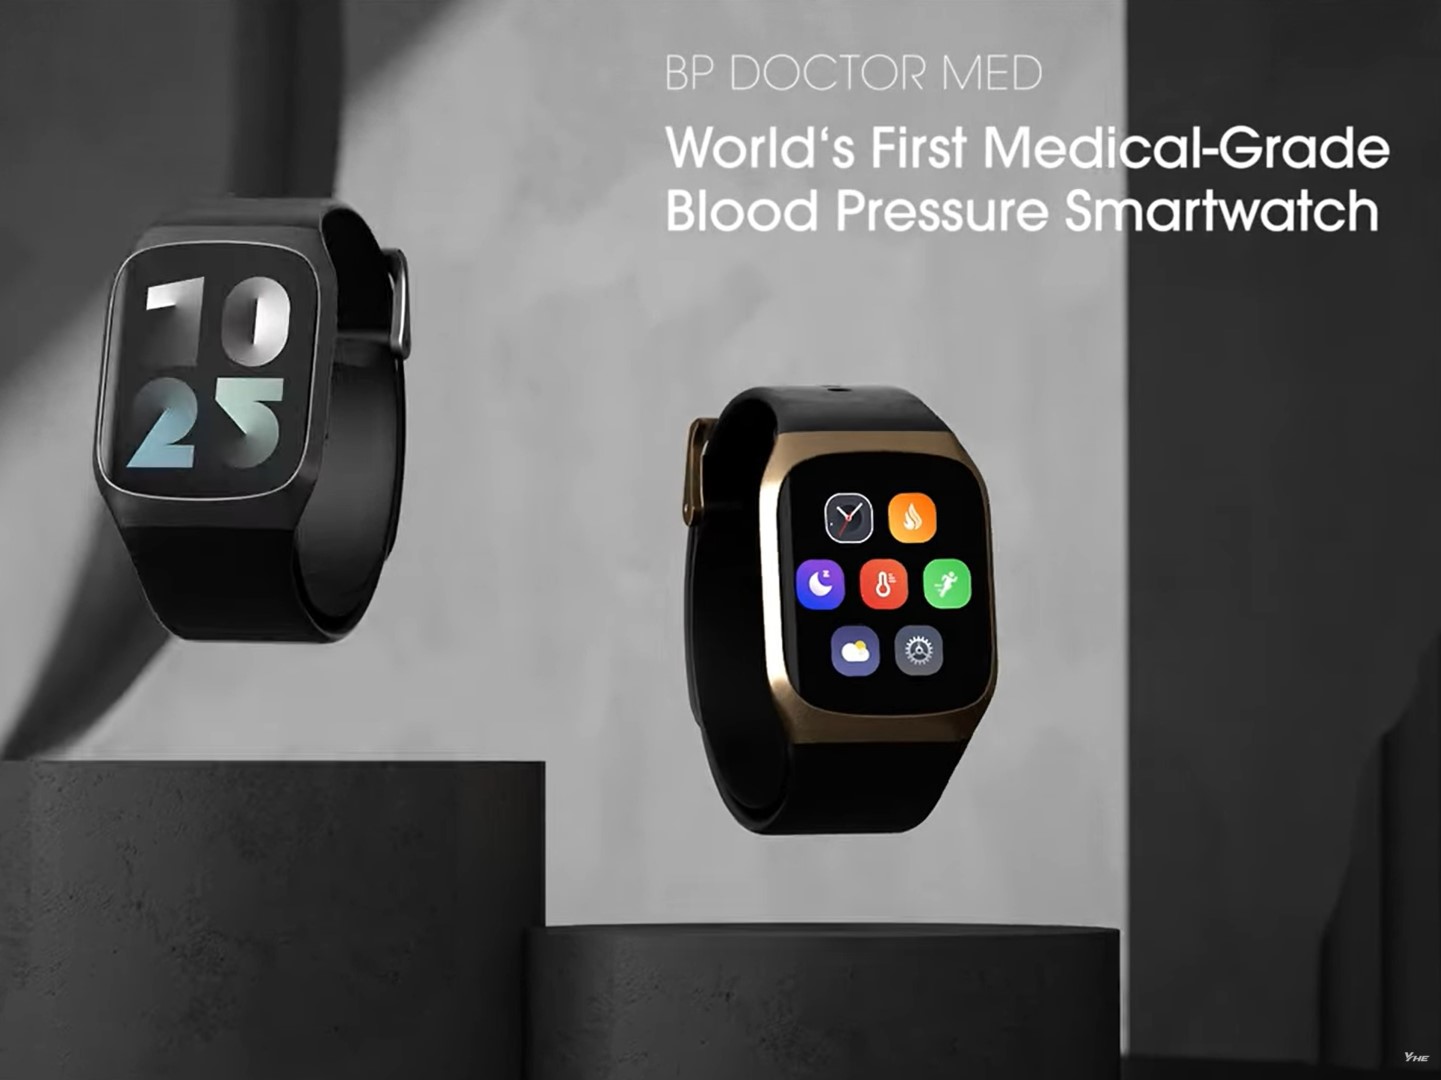 YHE Technology Launches World's 1st Medical-Grade Smartwatch - BP